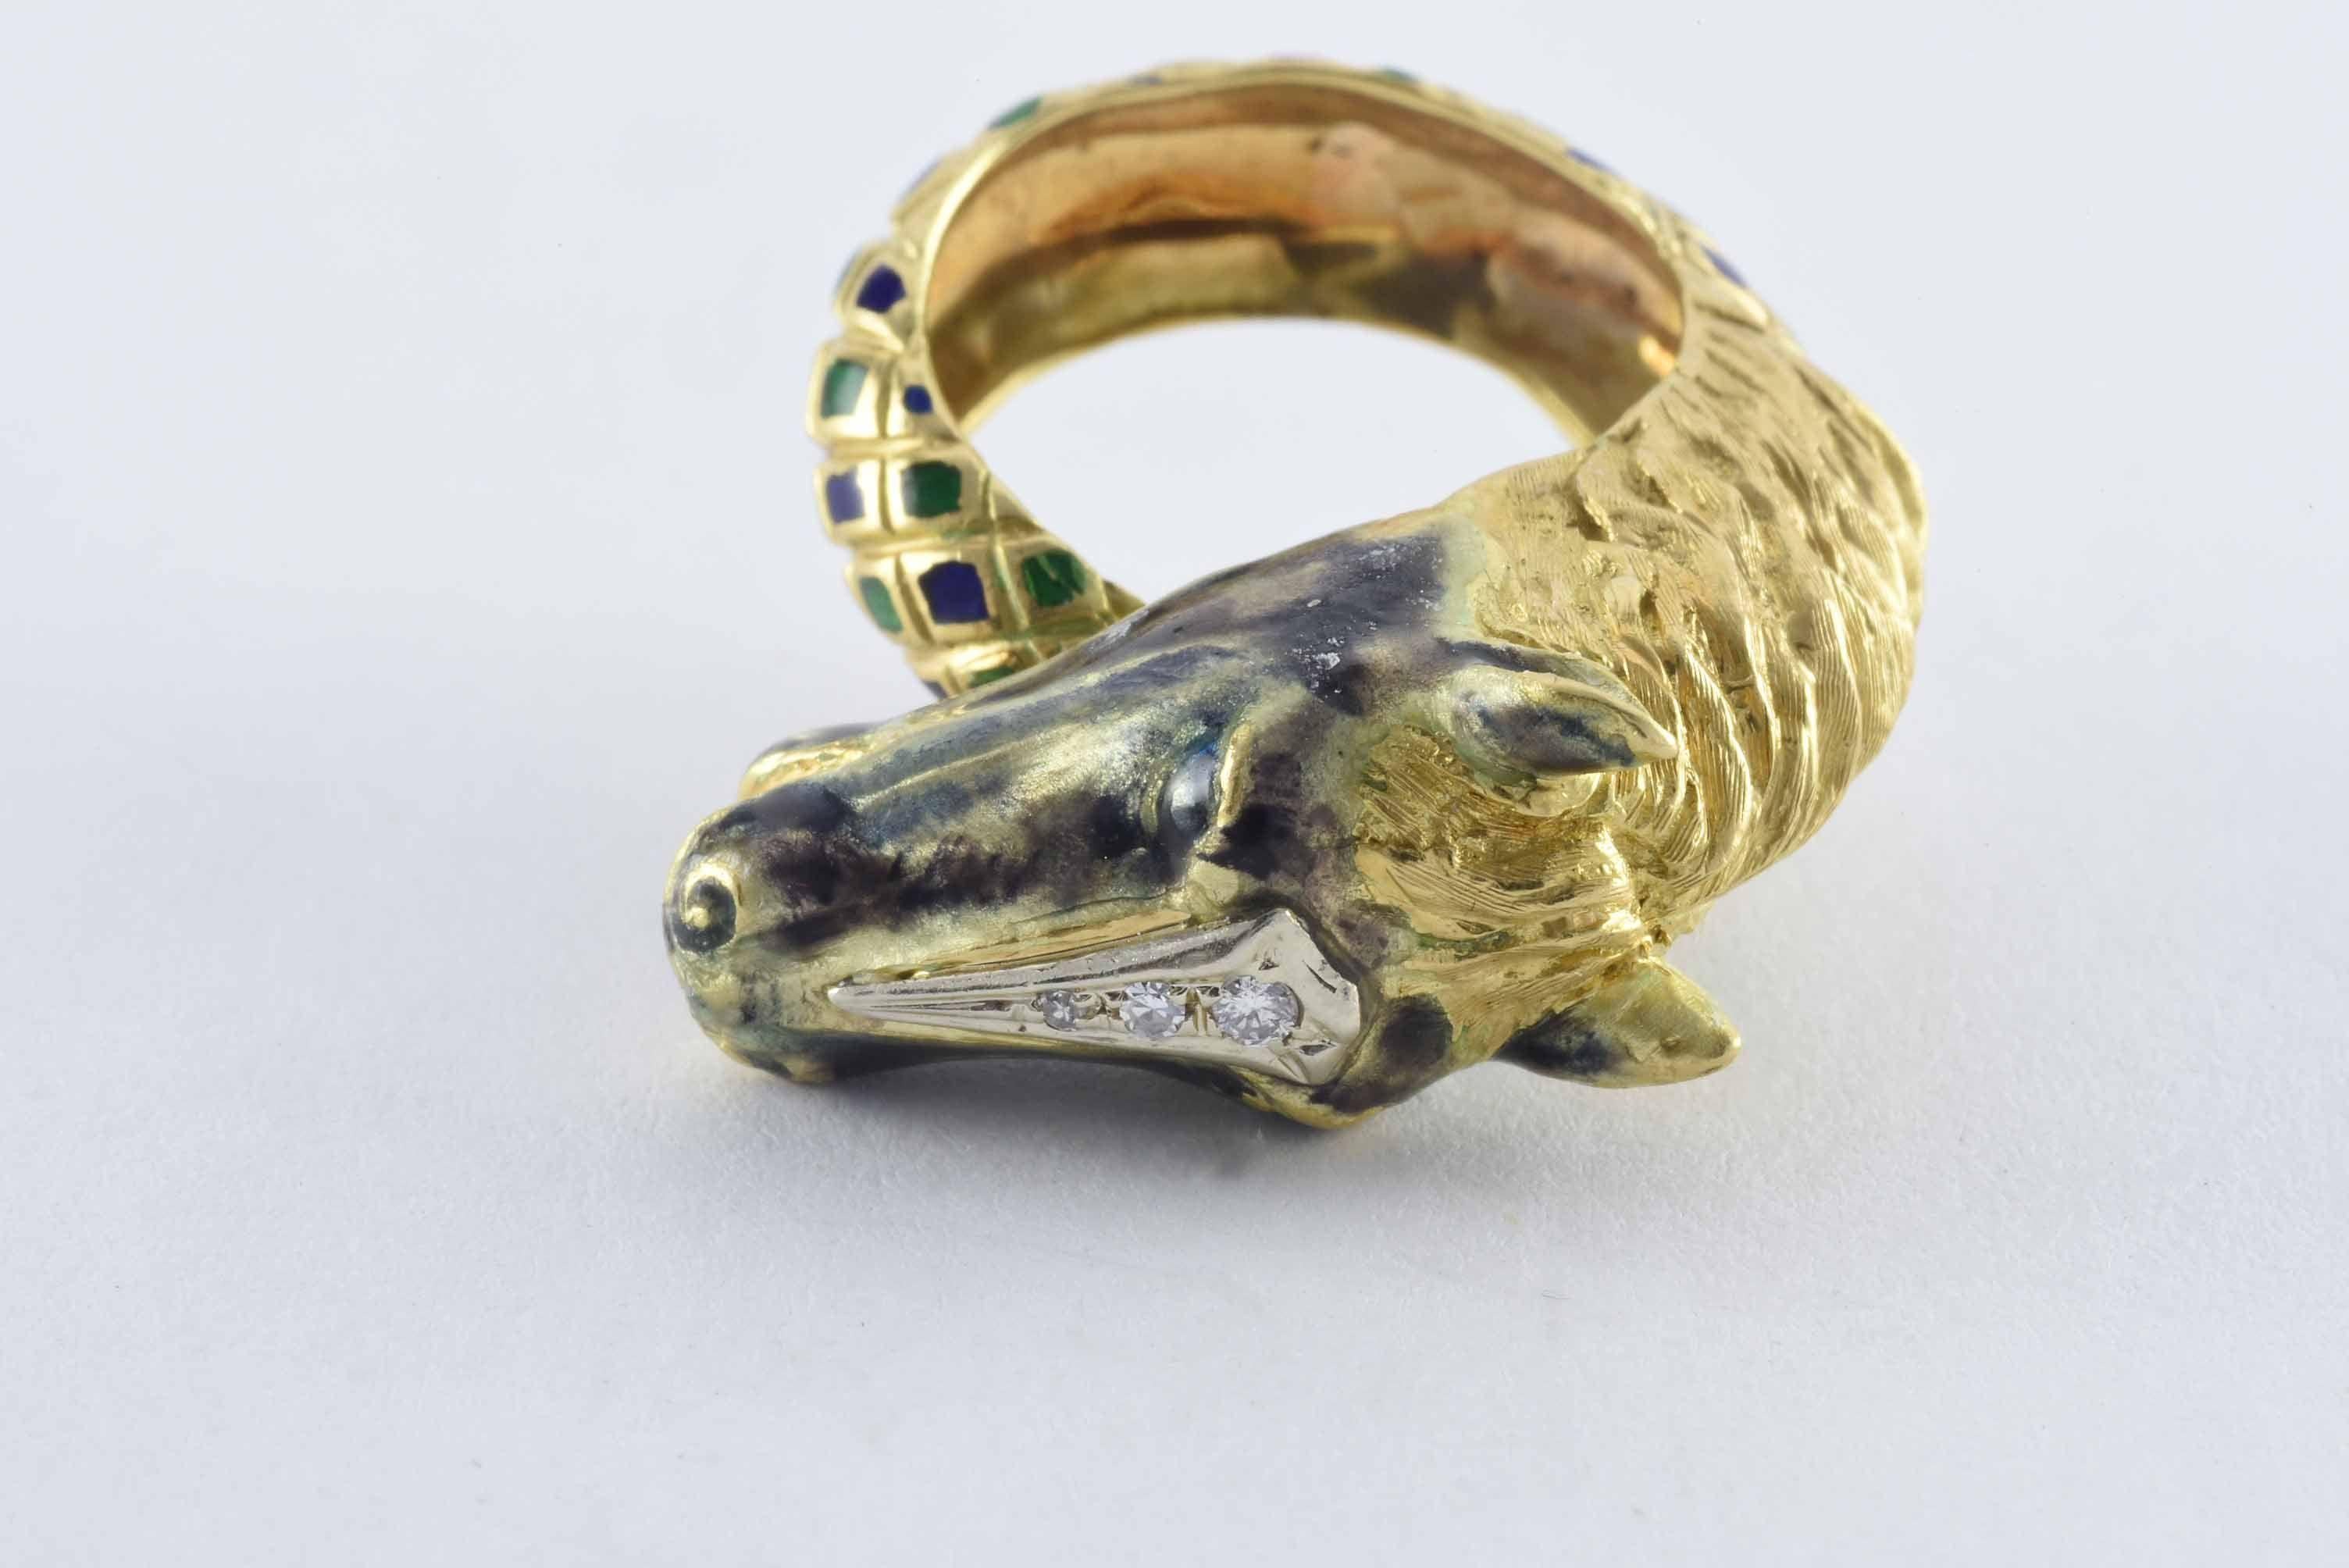 This incredible horse head ring reminiscent of designs by Italian jeweler Frascarolo features an intricately carved 18kt yellow gold horse head embellished with three single cut diamonds totaling approximately 0.10 carats and a golden mane connected